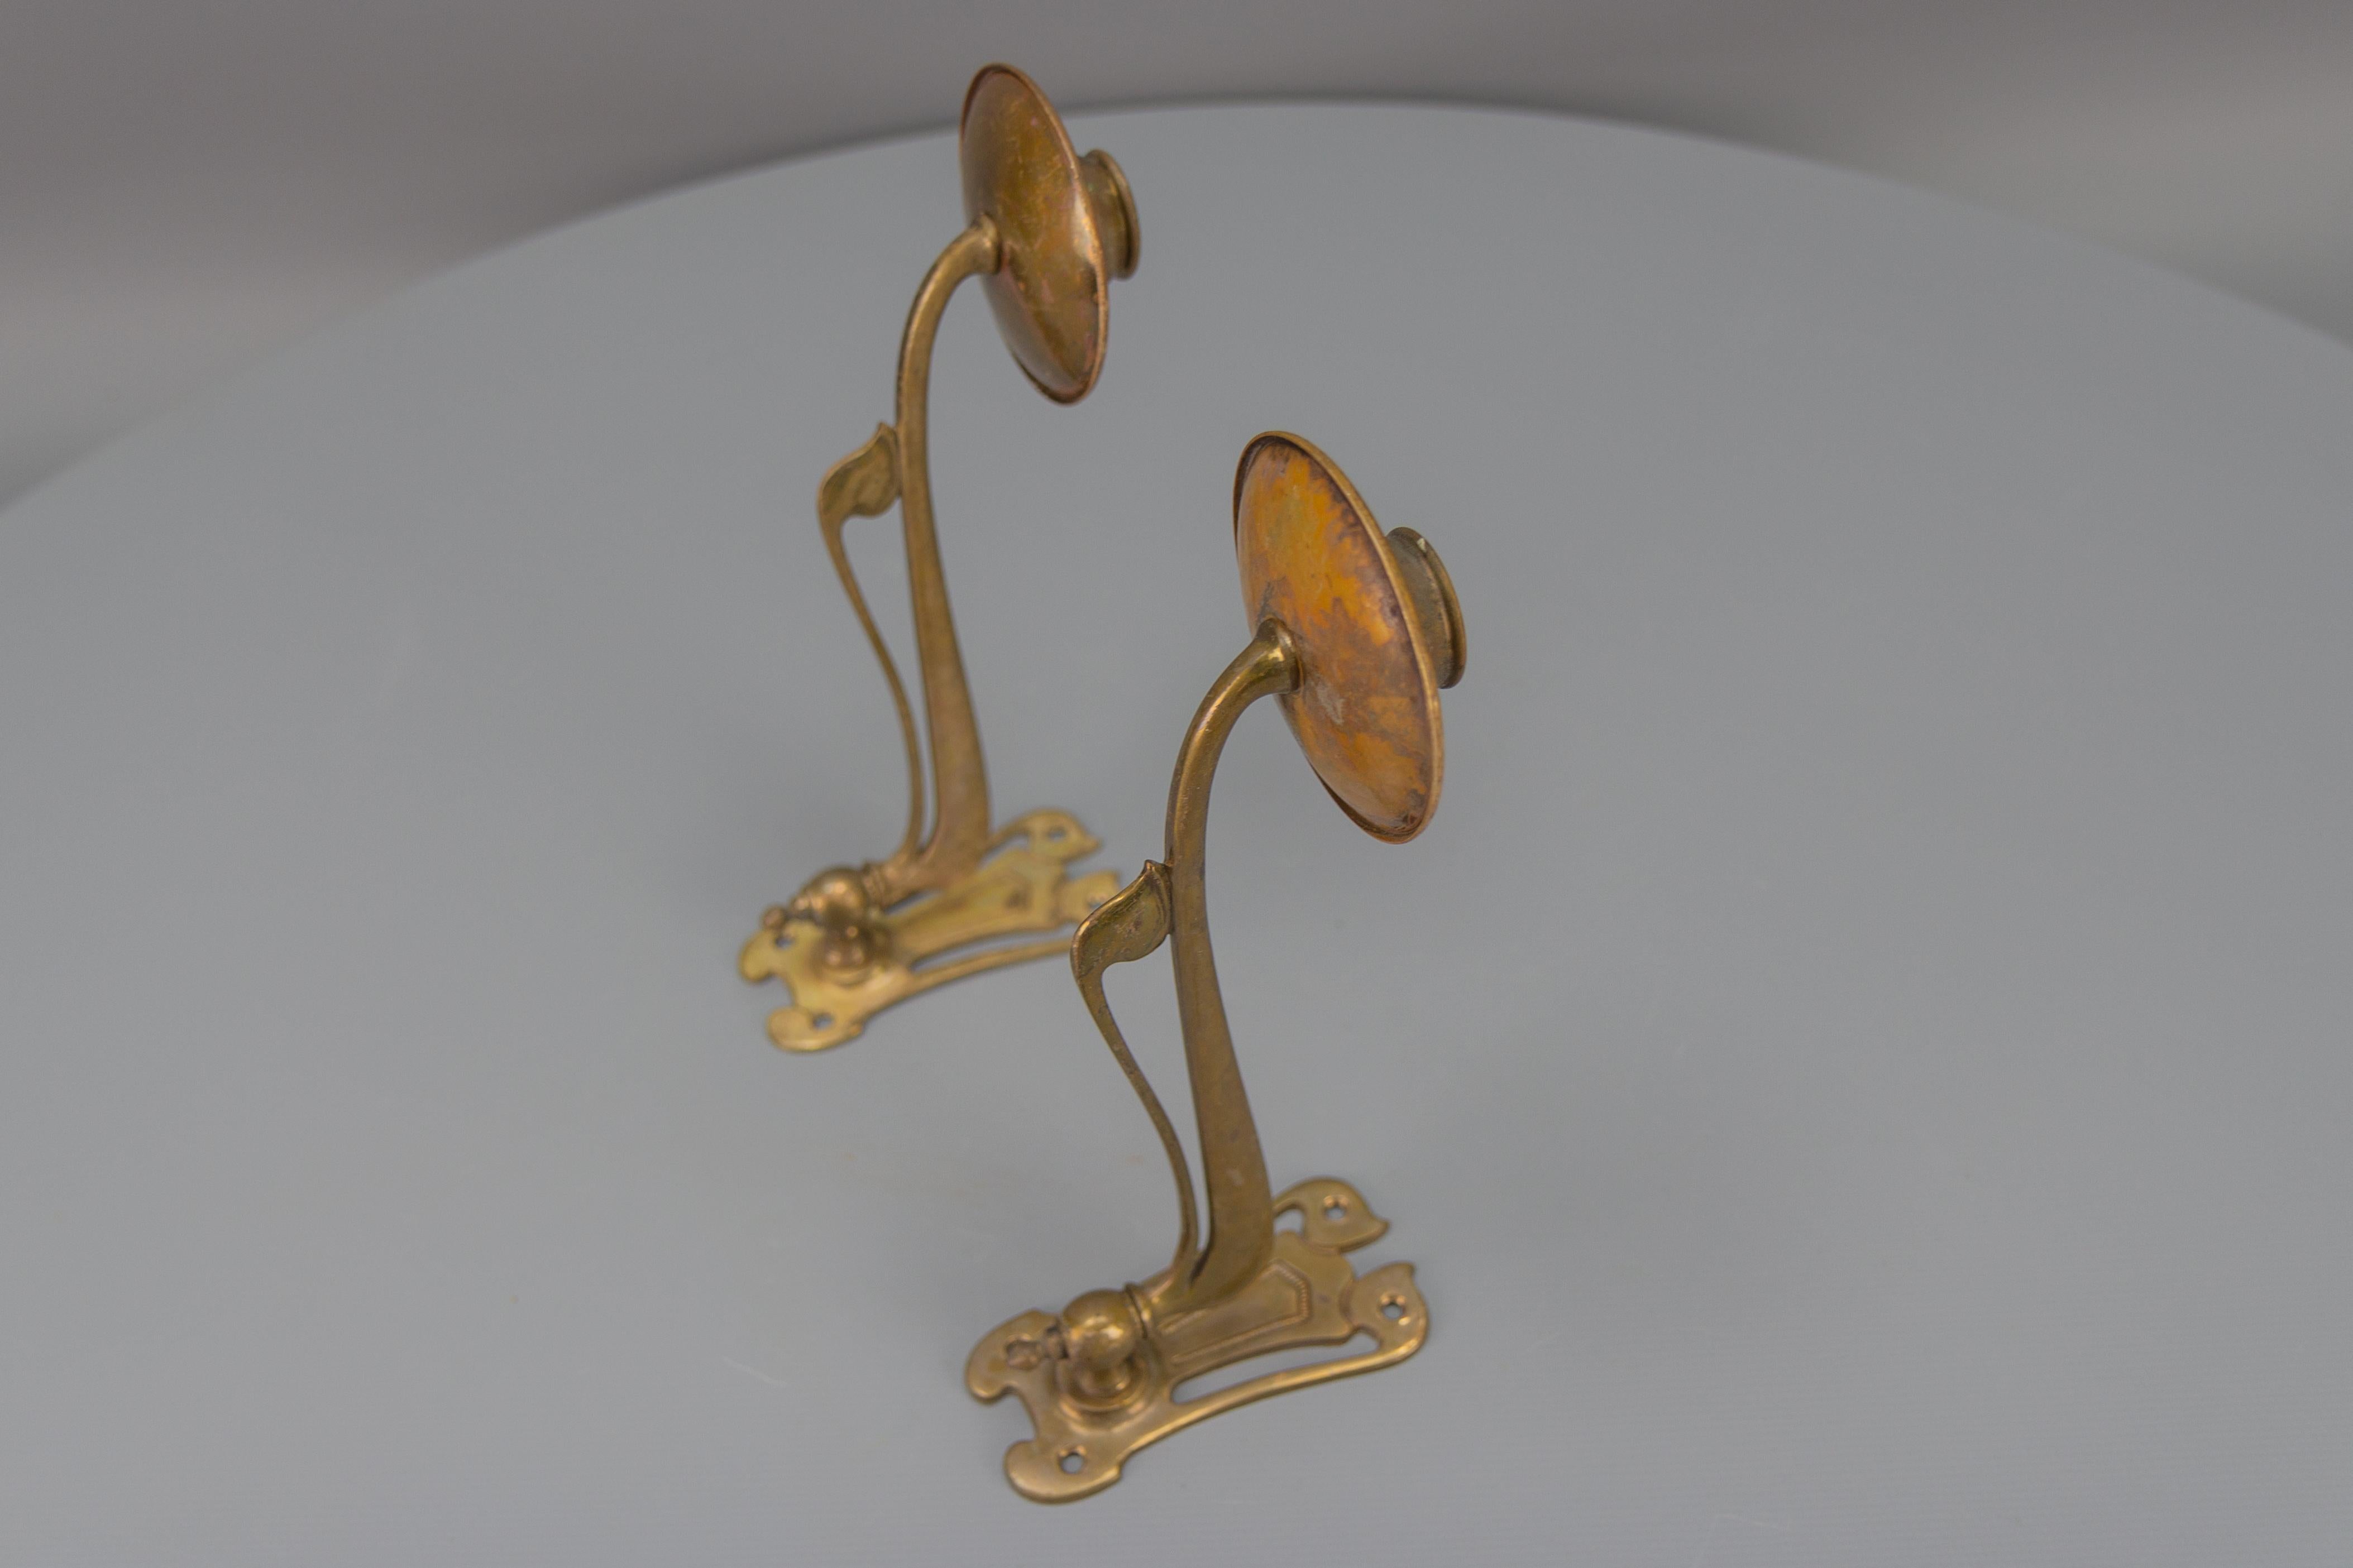 Pair of French Art Nouveau Brass Piano Wall Sconces Swivel Candle Holders, 1920 For Sale 7